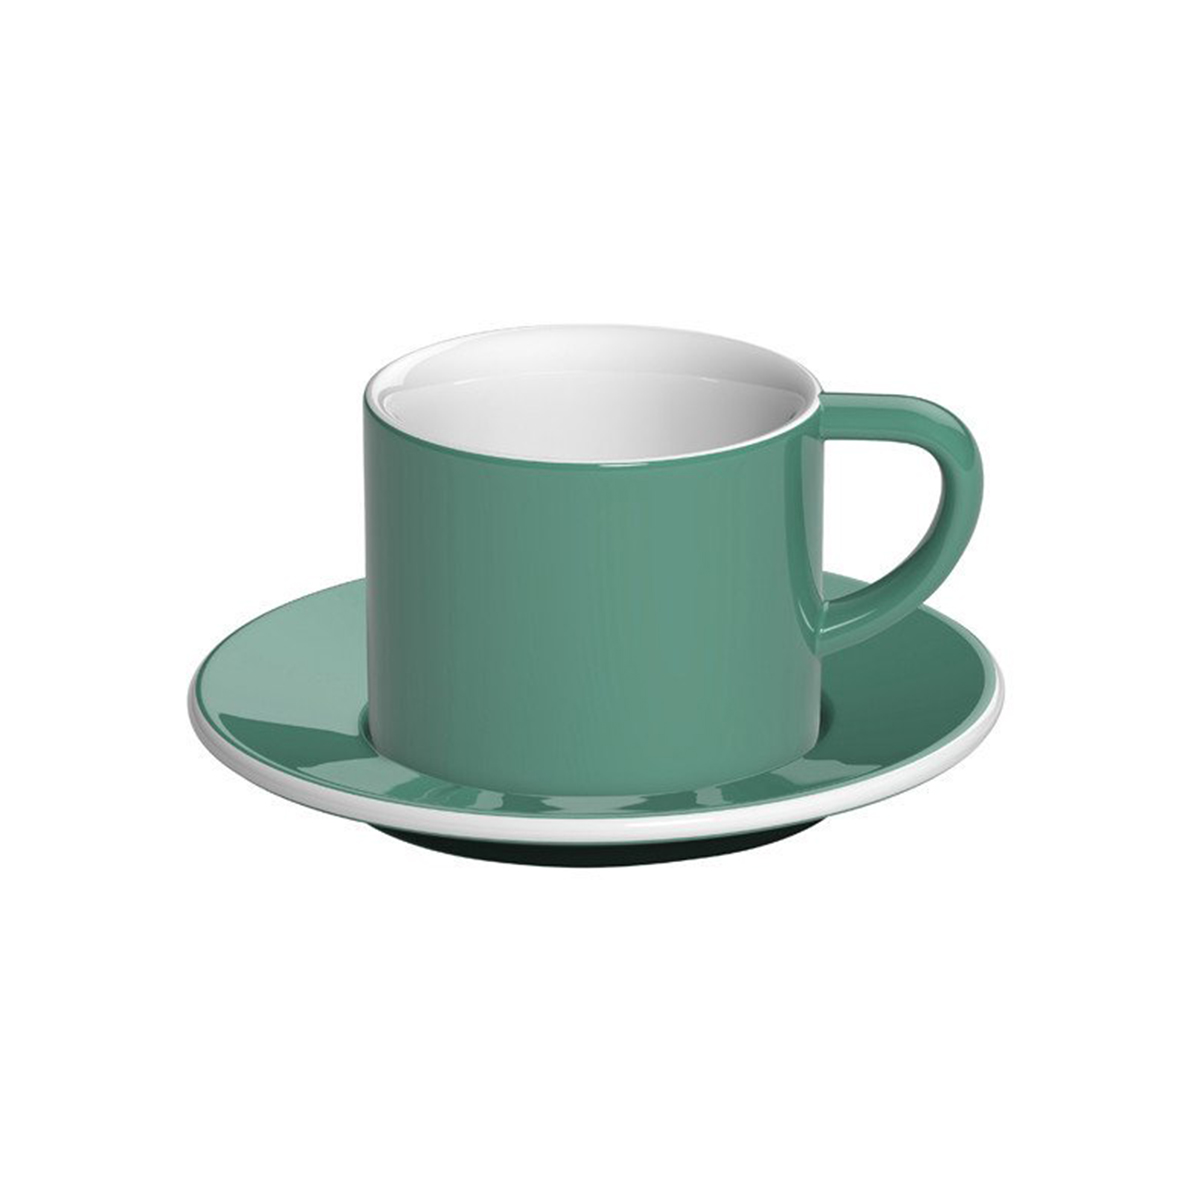 Bond cup and saucer